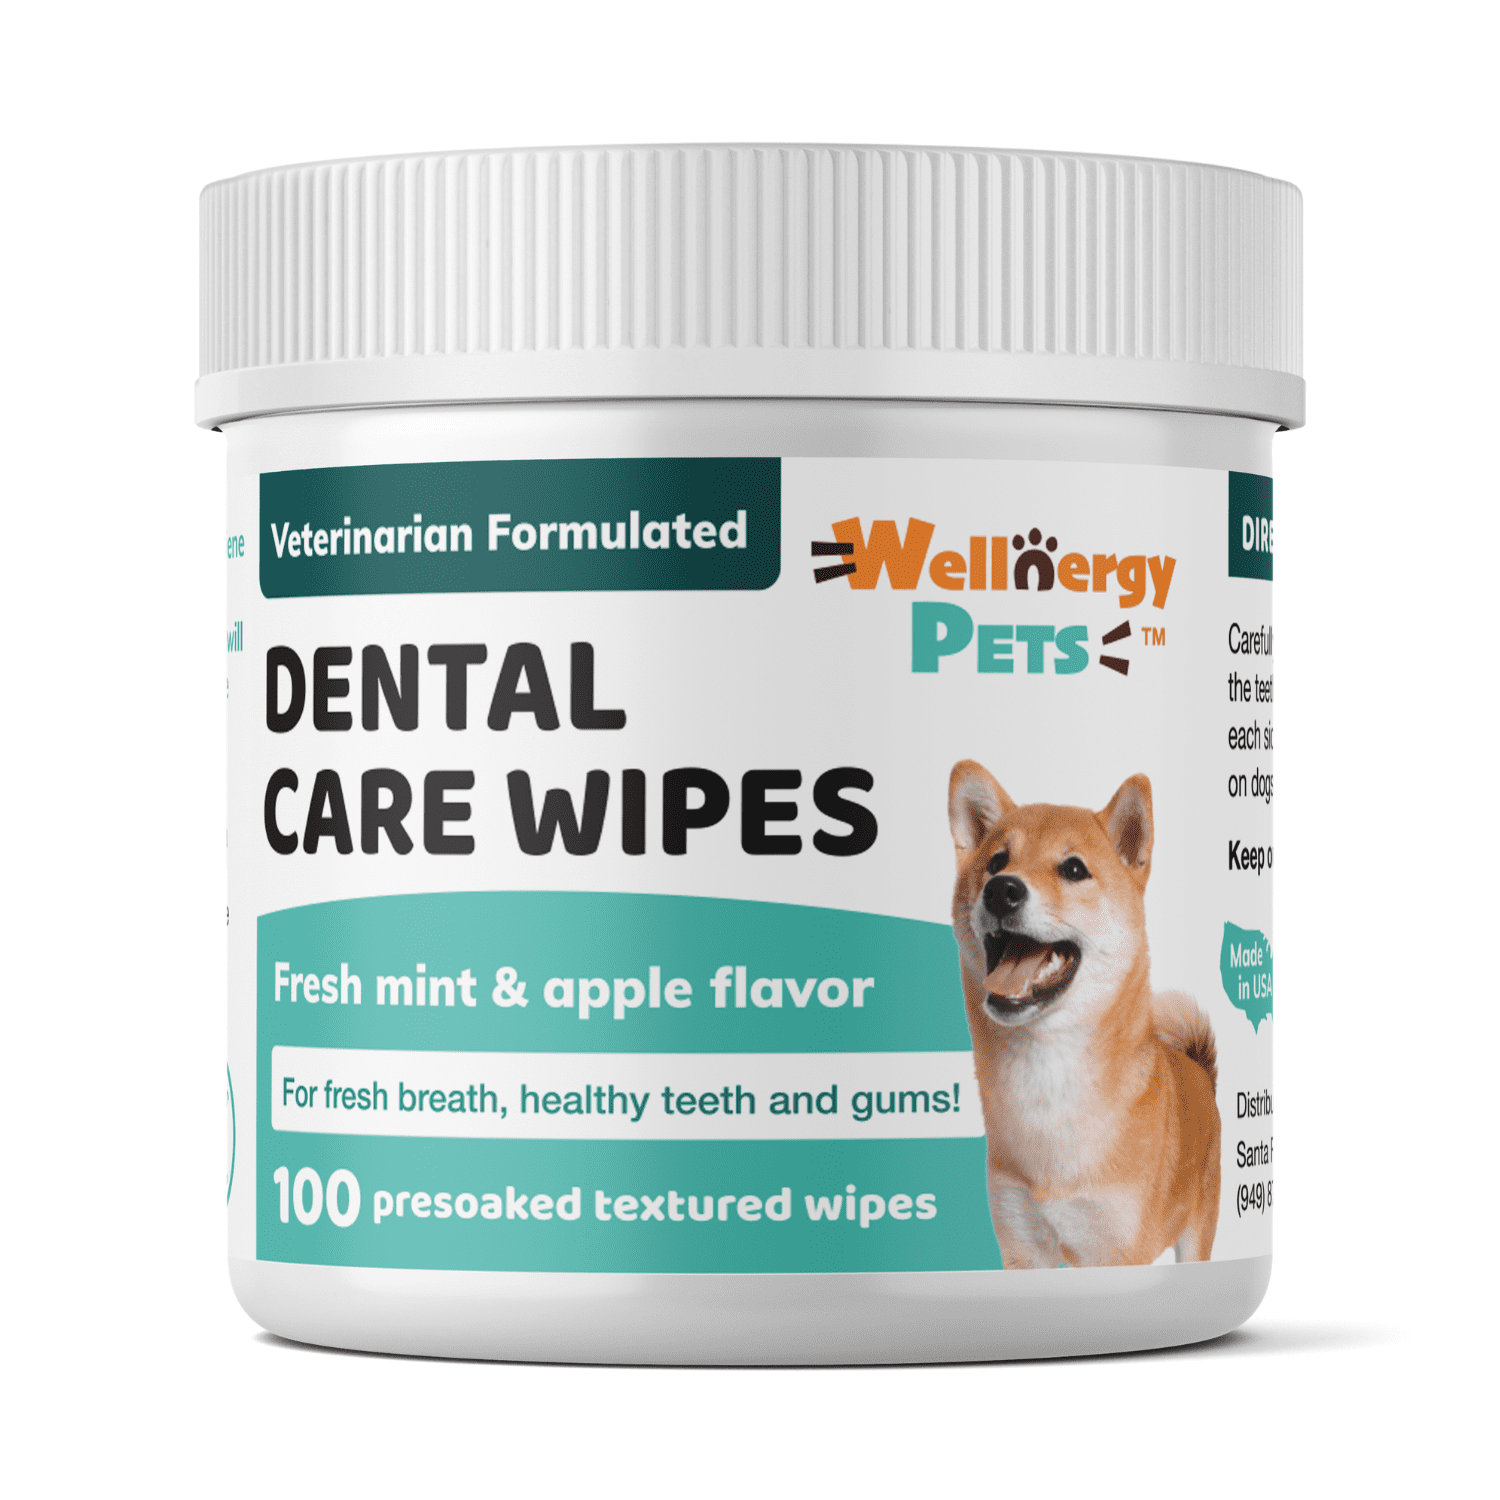 Dental Wipes For Dogs No Brush Formula Improve Oral Hygiene And